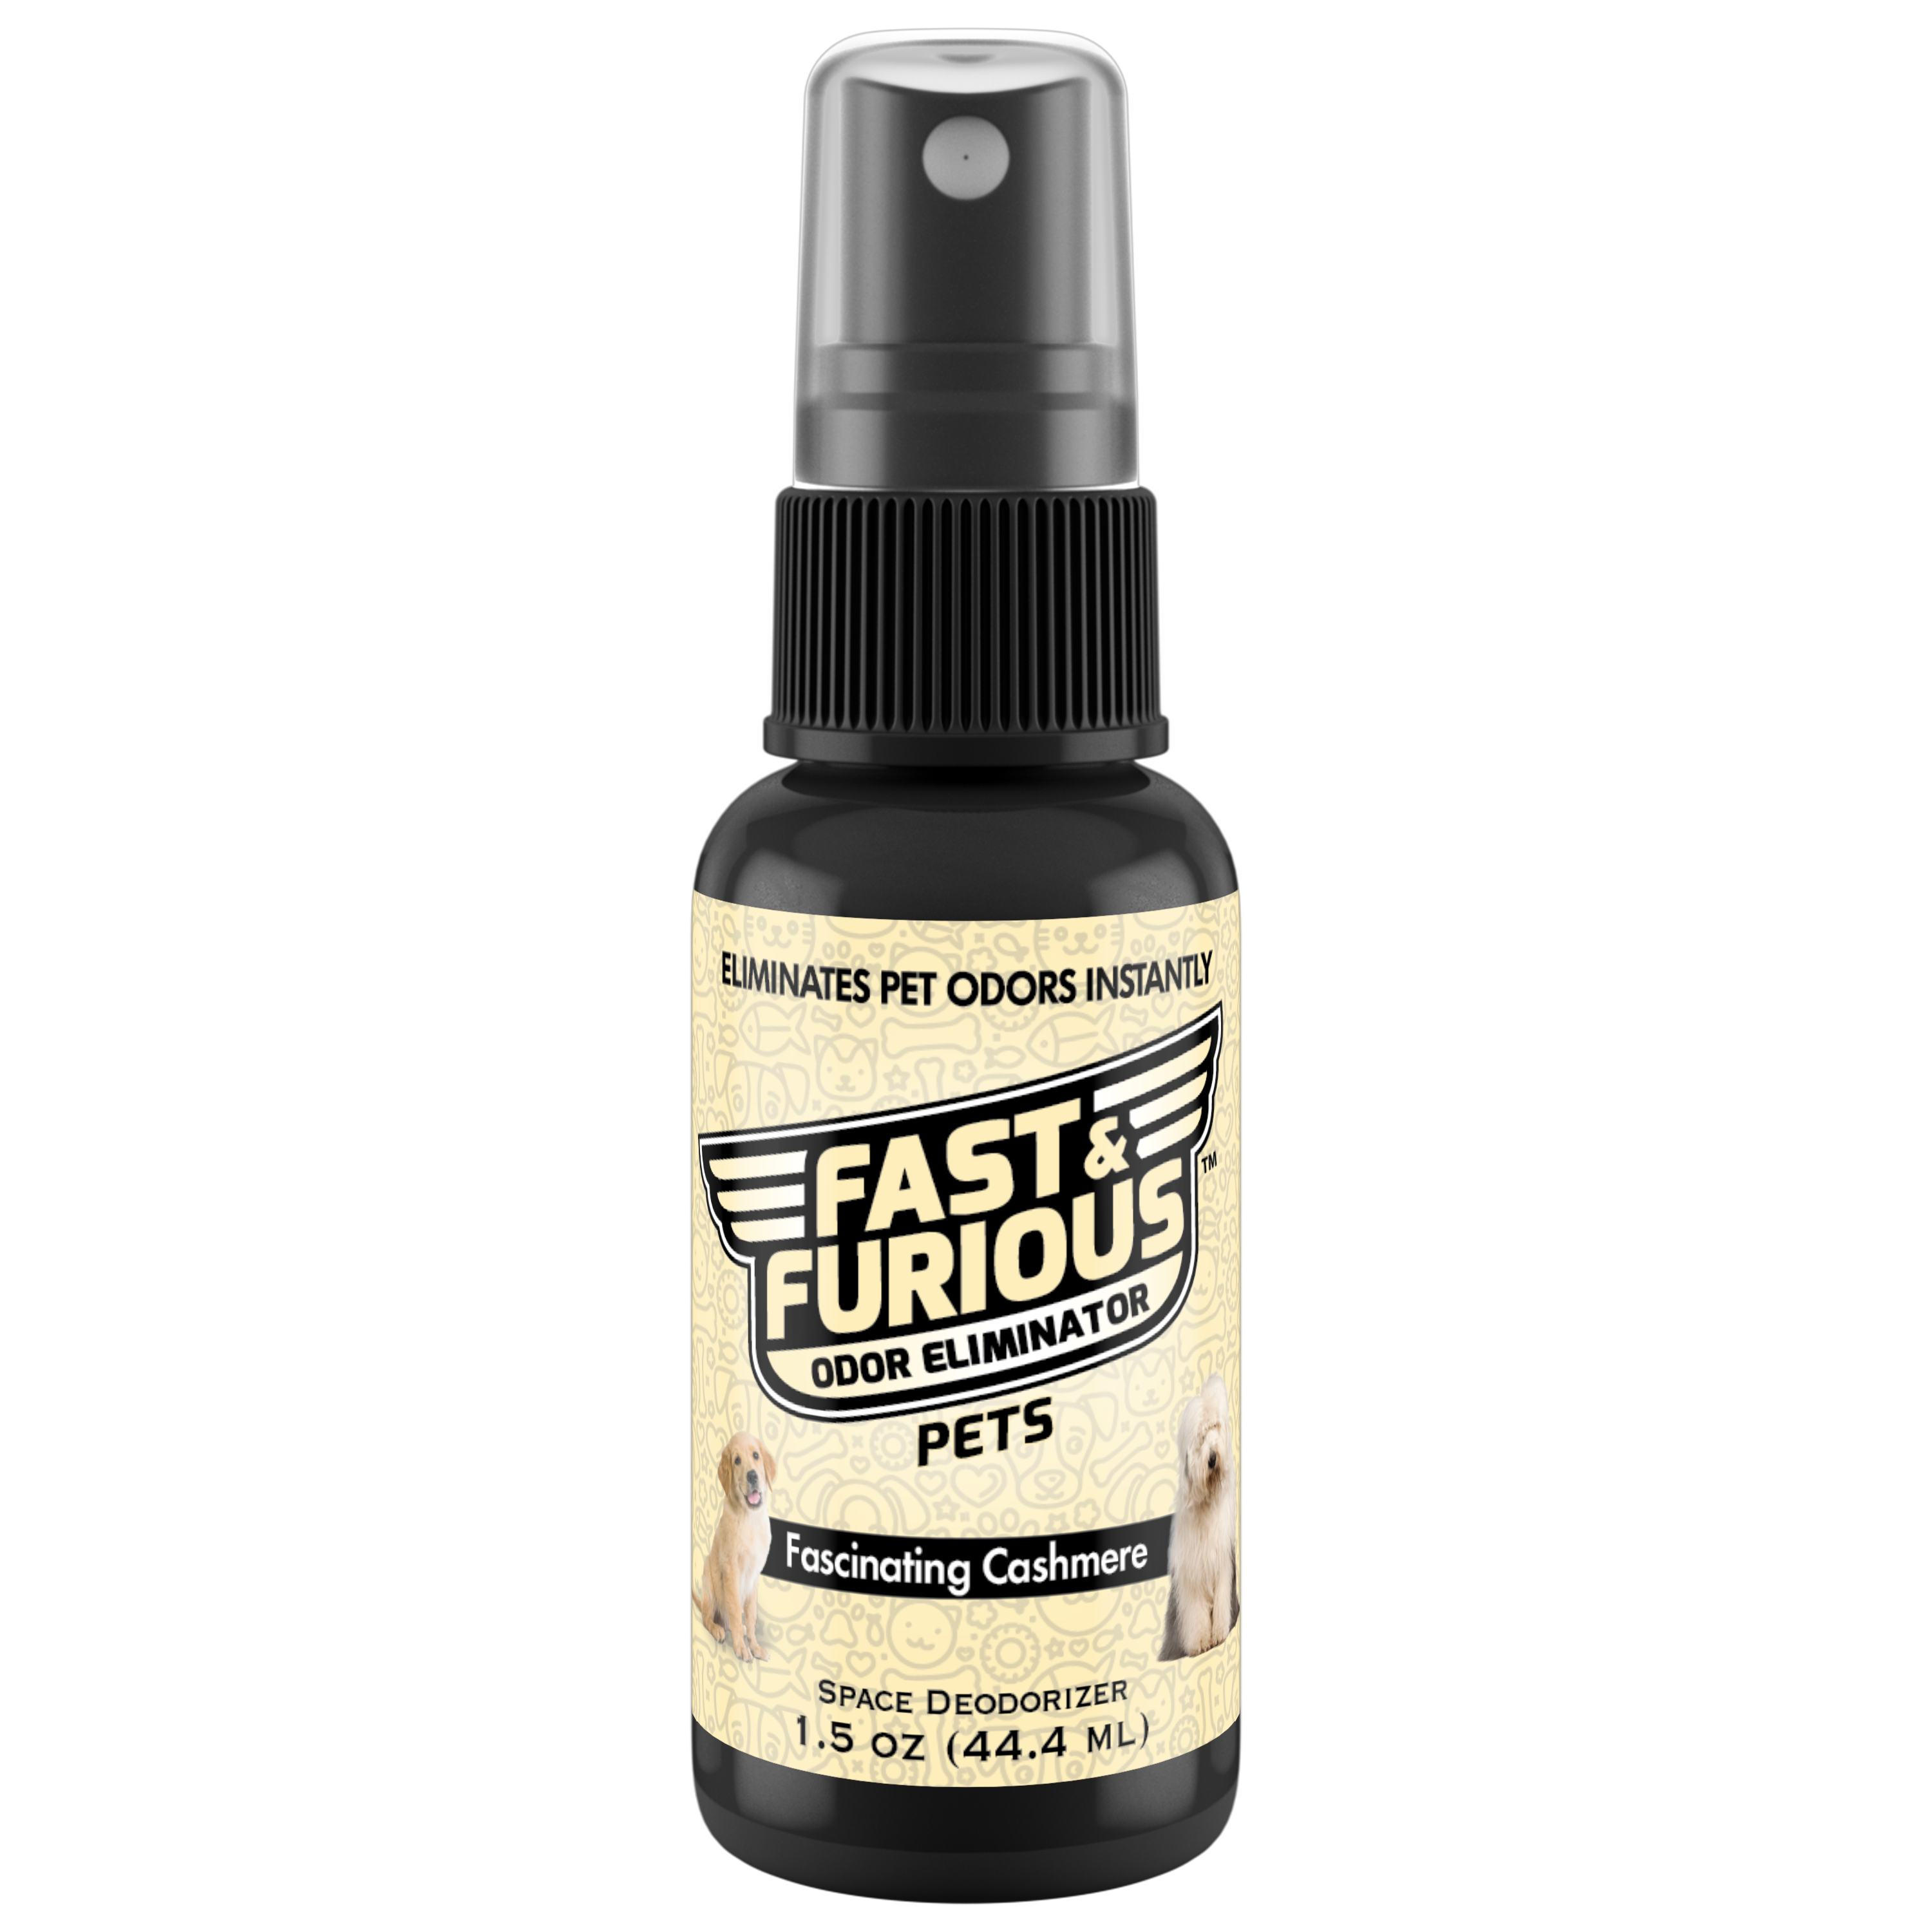 Fast and Furious Pets Odor Eliminator - Fascinating Cashmere Scent